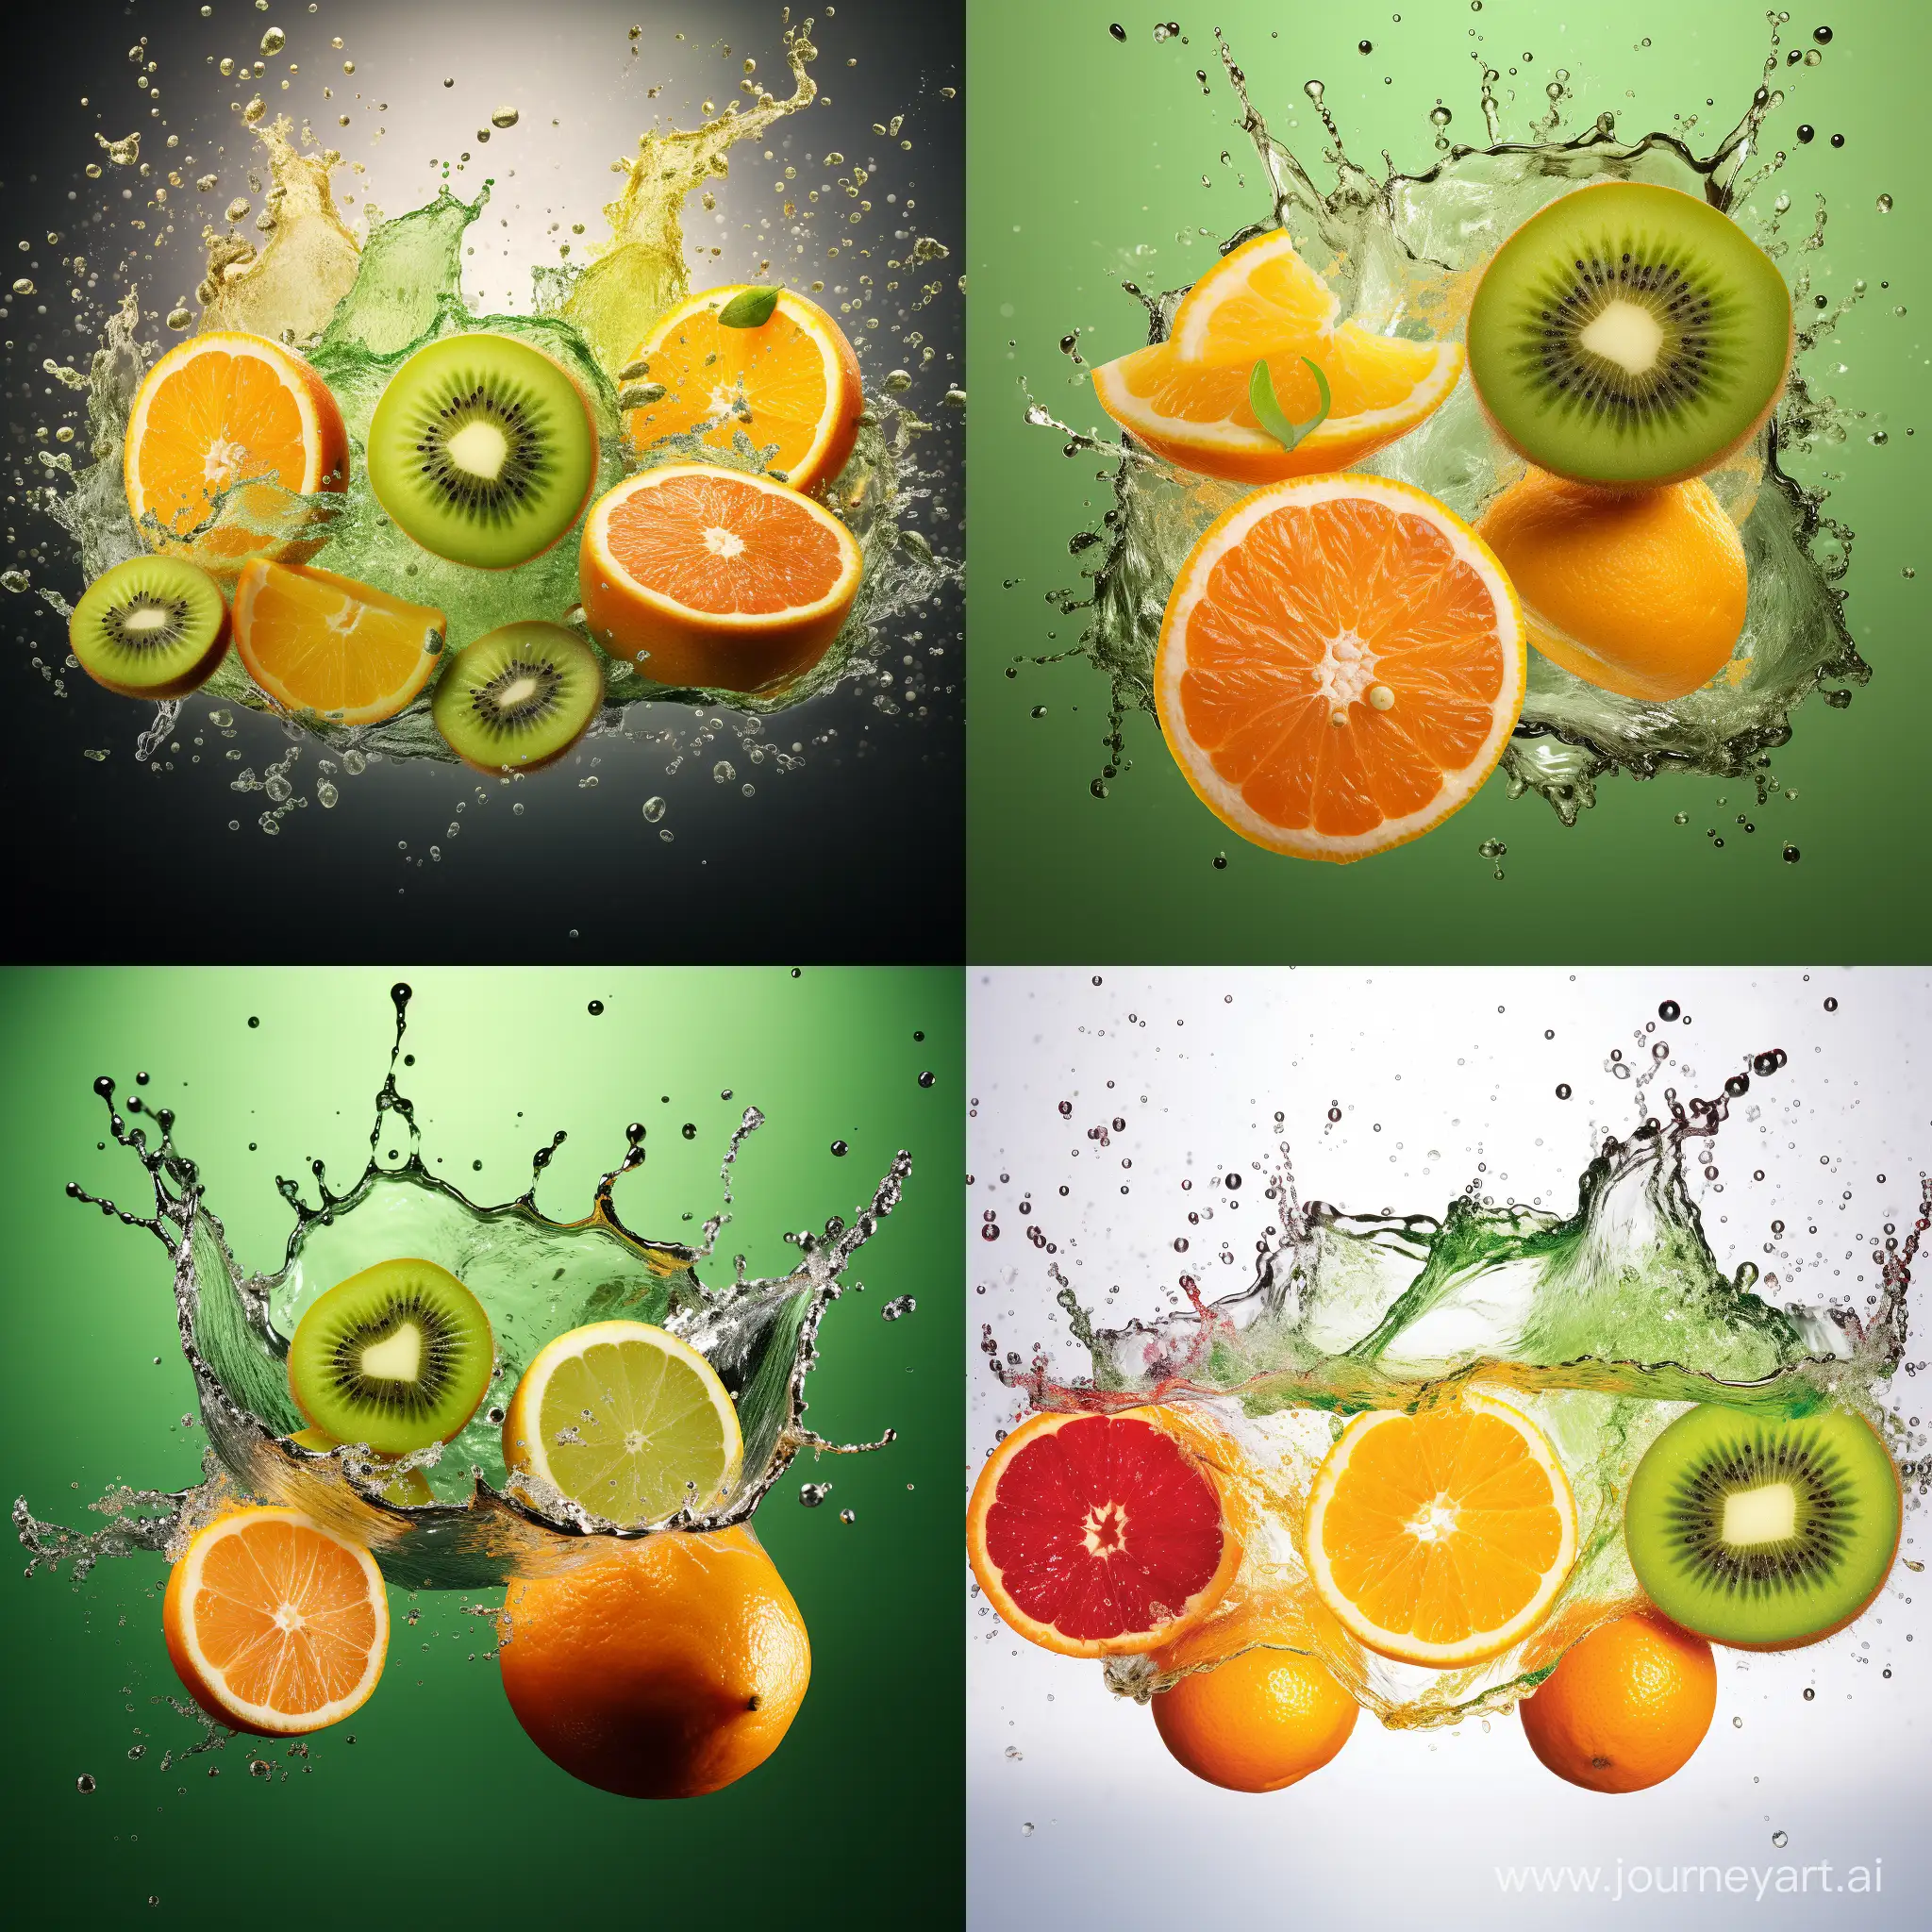 he image showcases three vibrant and dynamic splashes of different beverages, each associated with a specific fruit:  On the left, there's a green splash that looks like avocado juice, with avocados flying around the burst. In the middle, there's a bright orange splash that appears to be an orange juice, with sliced oranges alongside the splash. On the right, there's a pale yellow splash that seems to be a lemon mint juice, with lemons and mint leaves scattered around the splash. The background colors for each splash complement the respective beverages, enhancing the visual appeal. The overall image portrays the freshness and vitality of the drinks.